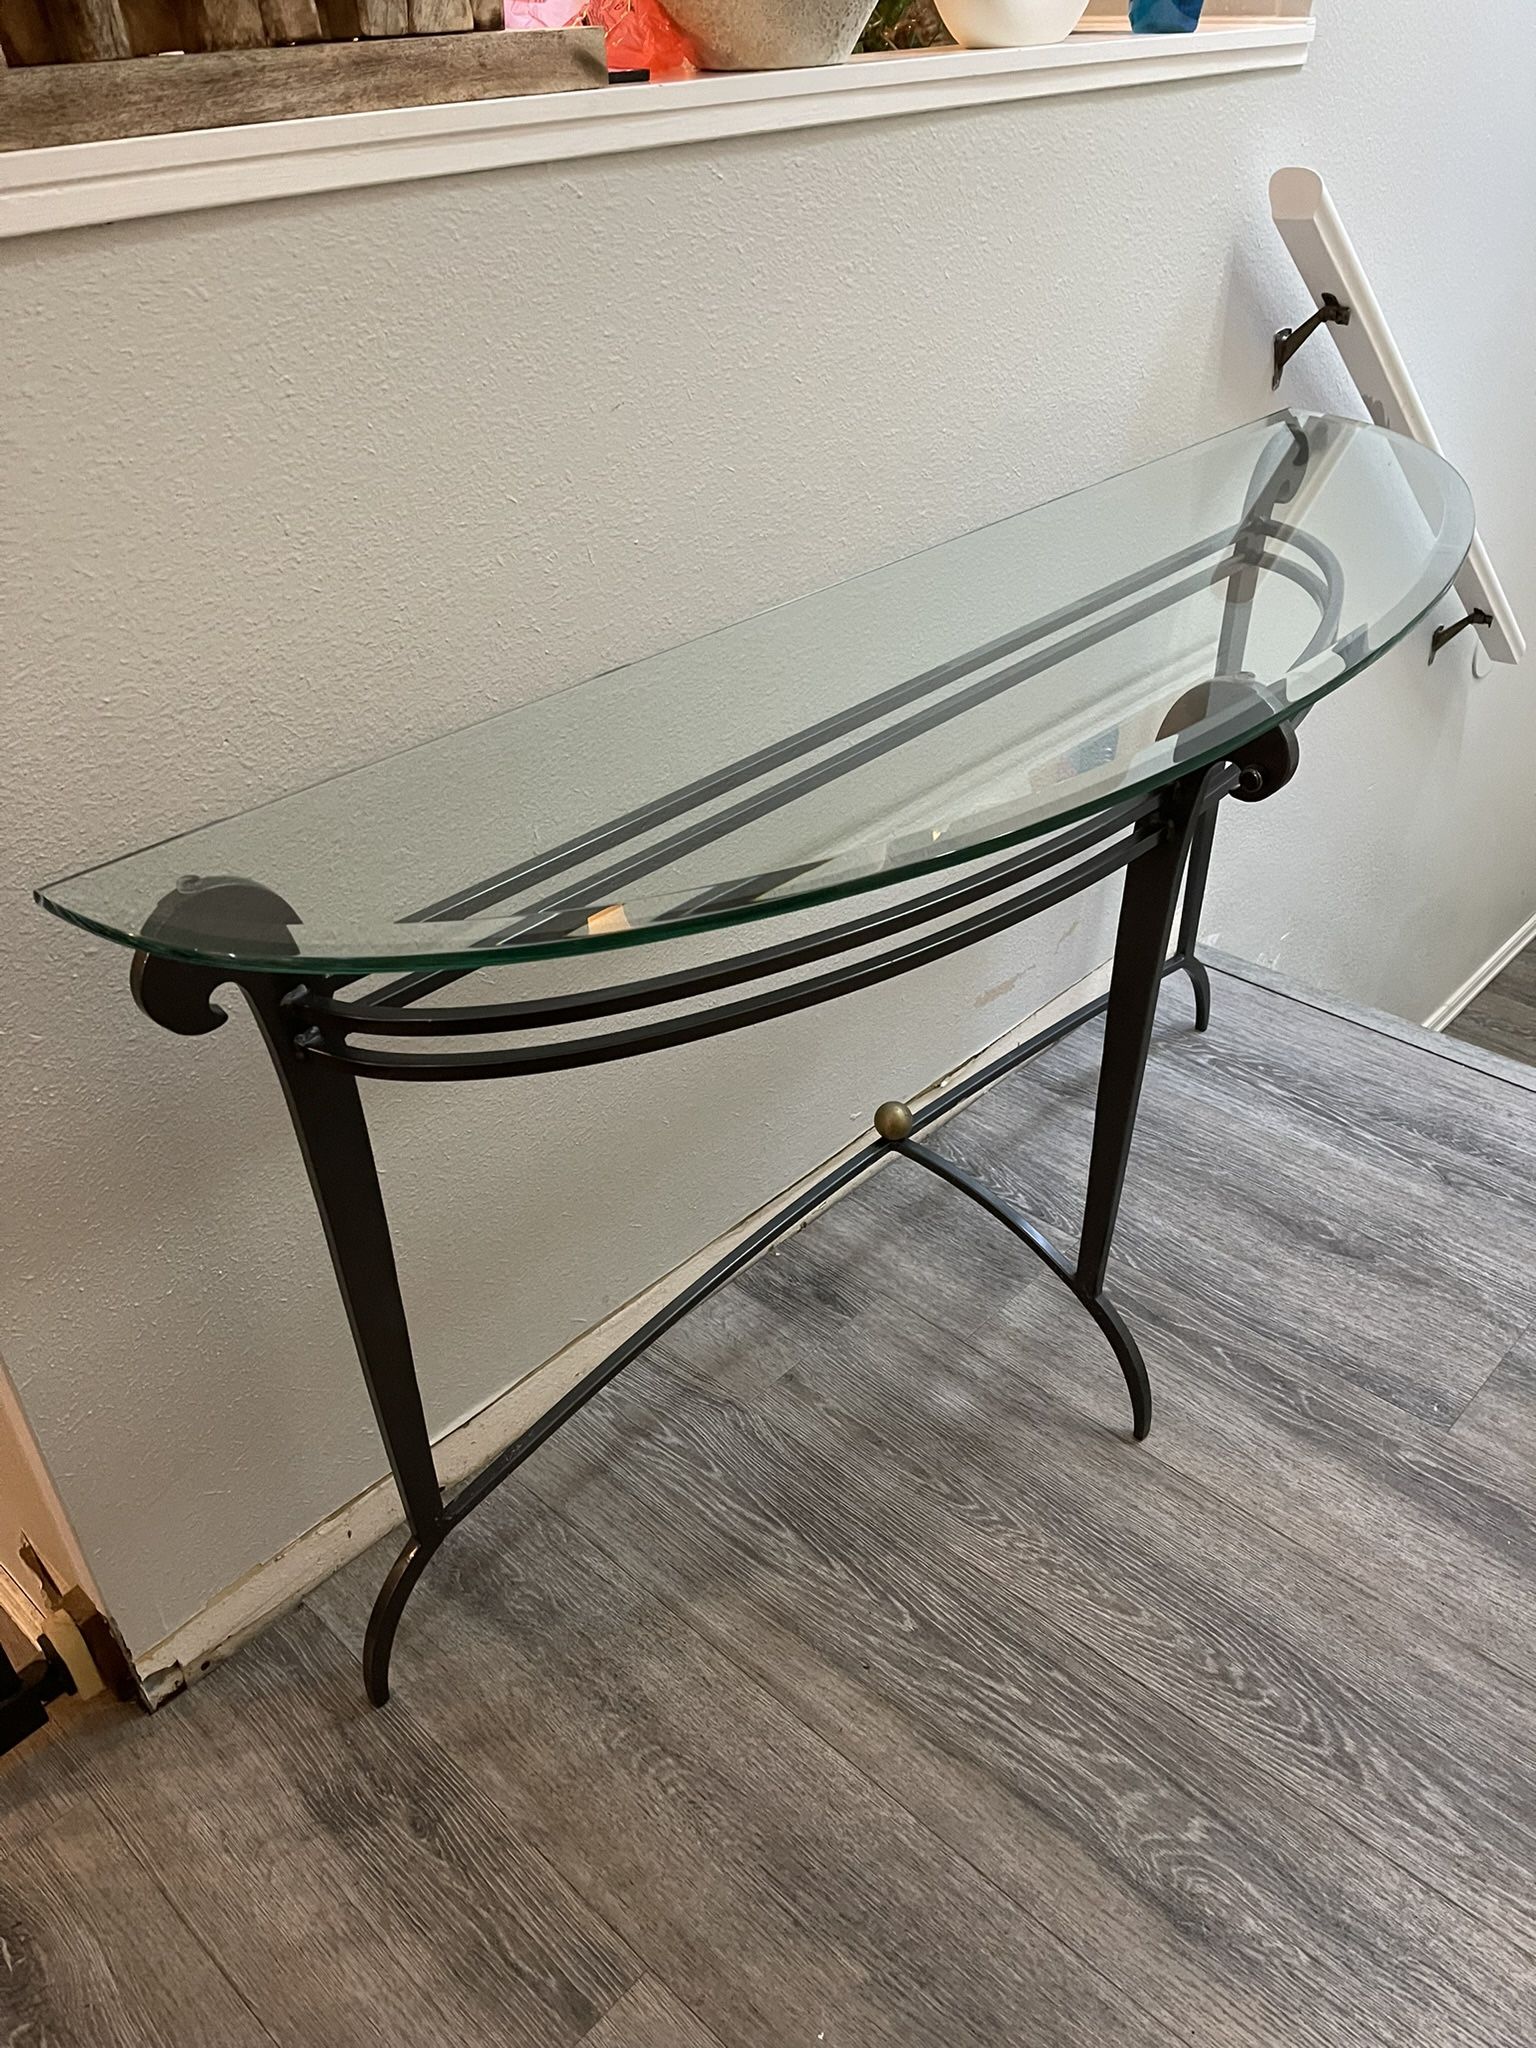 Glass Metal Console/Entry Way Table